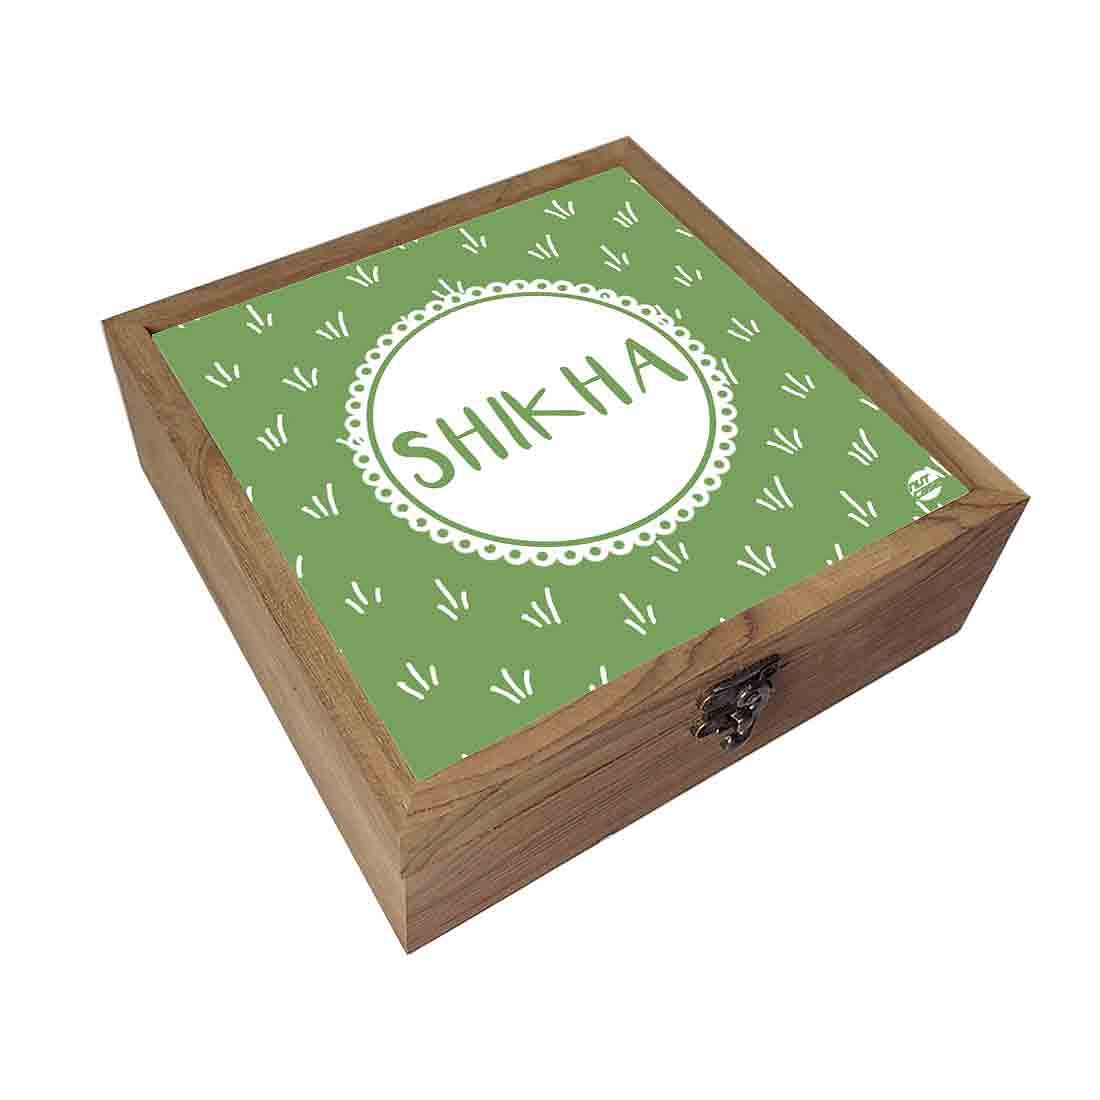 Personalized Jewellery Box for Women - Grass Texture Nutcase